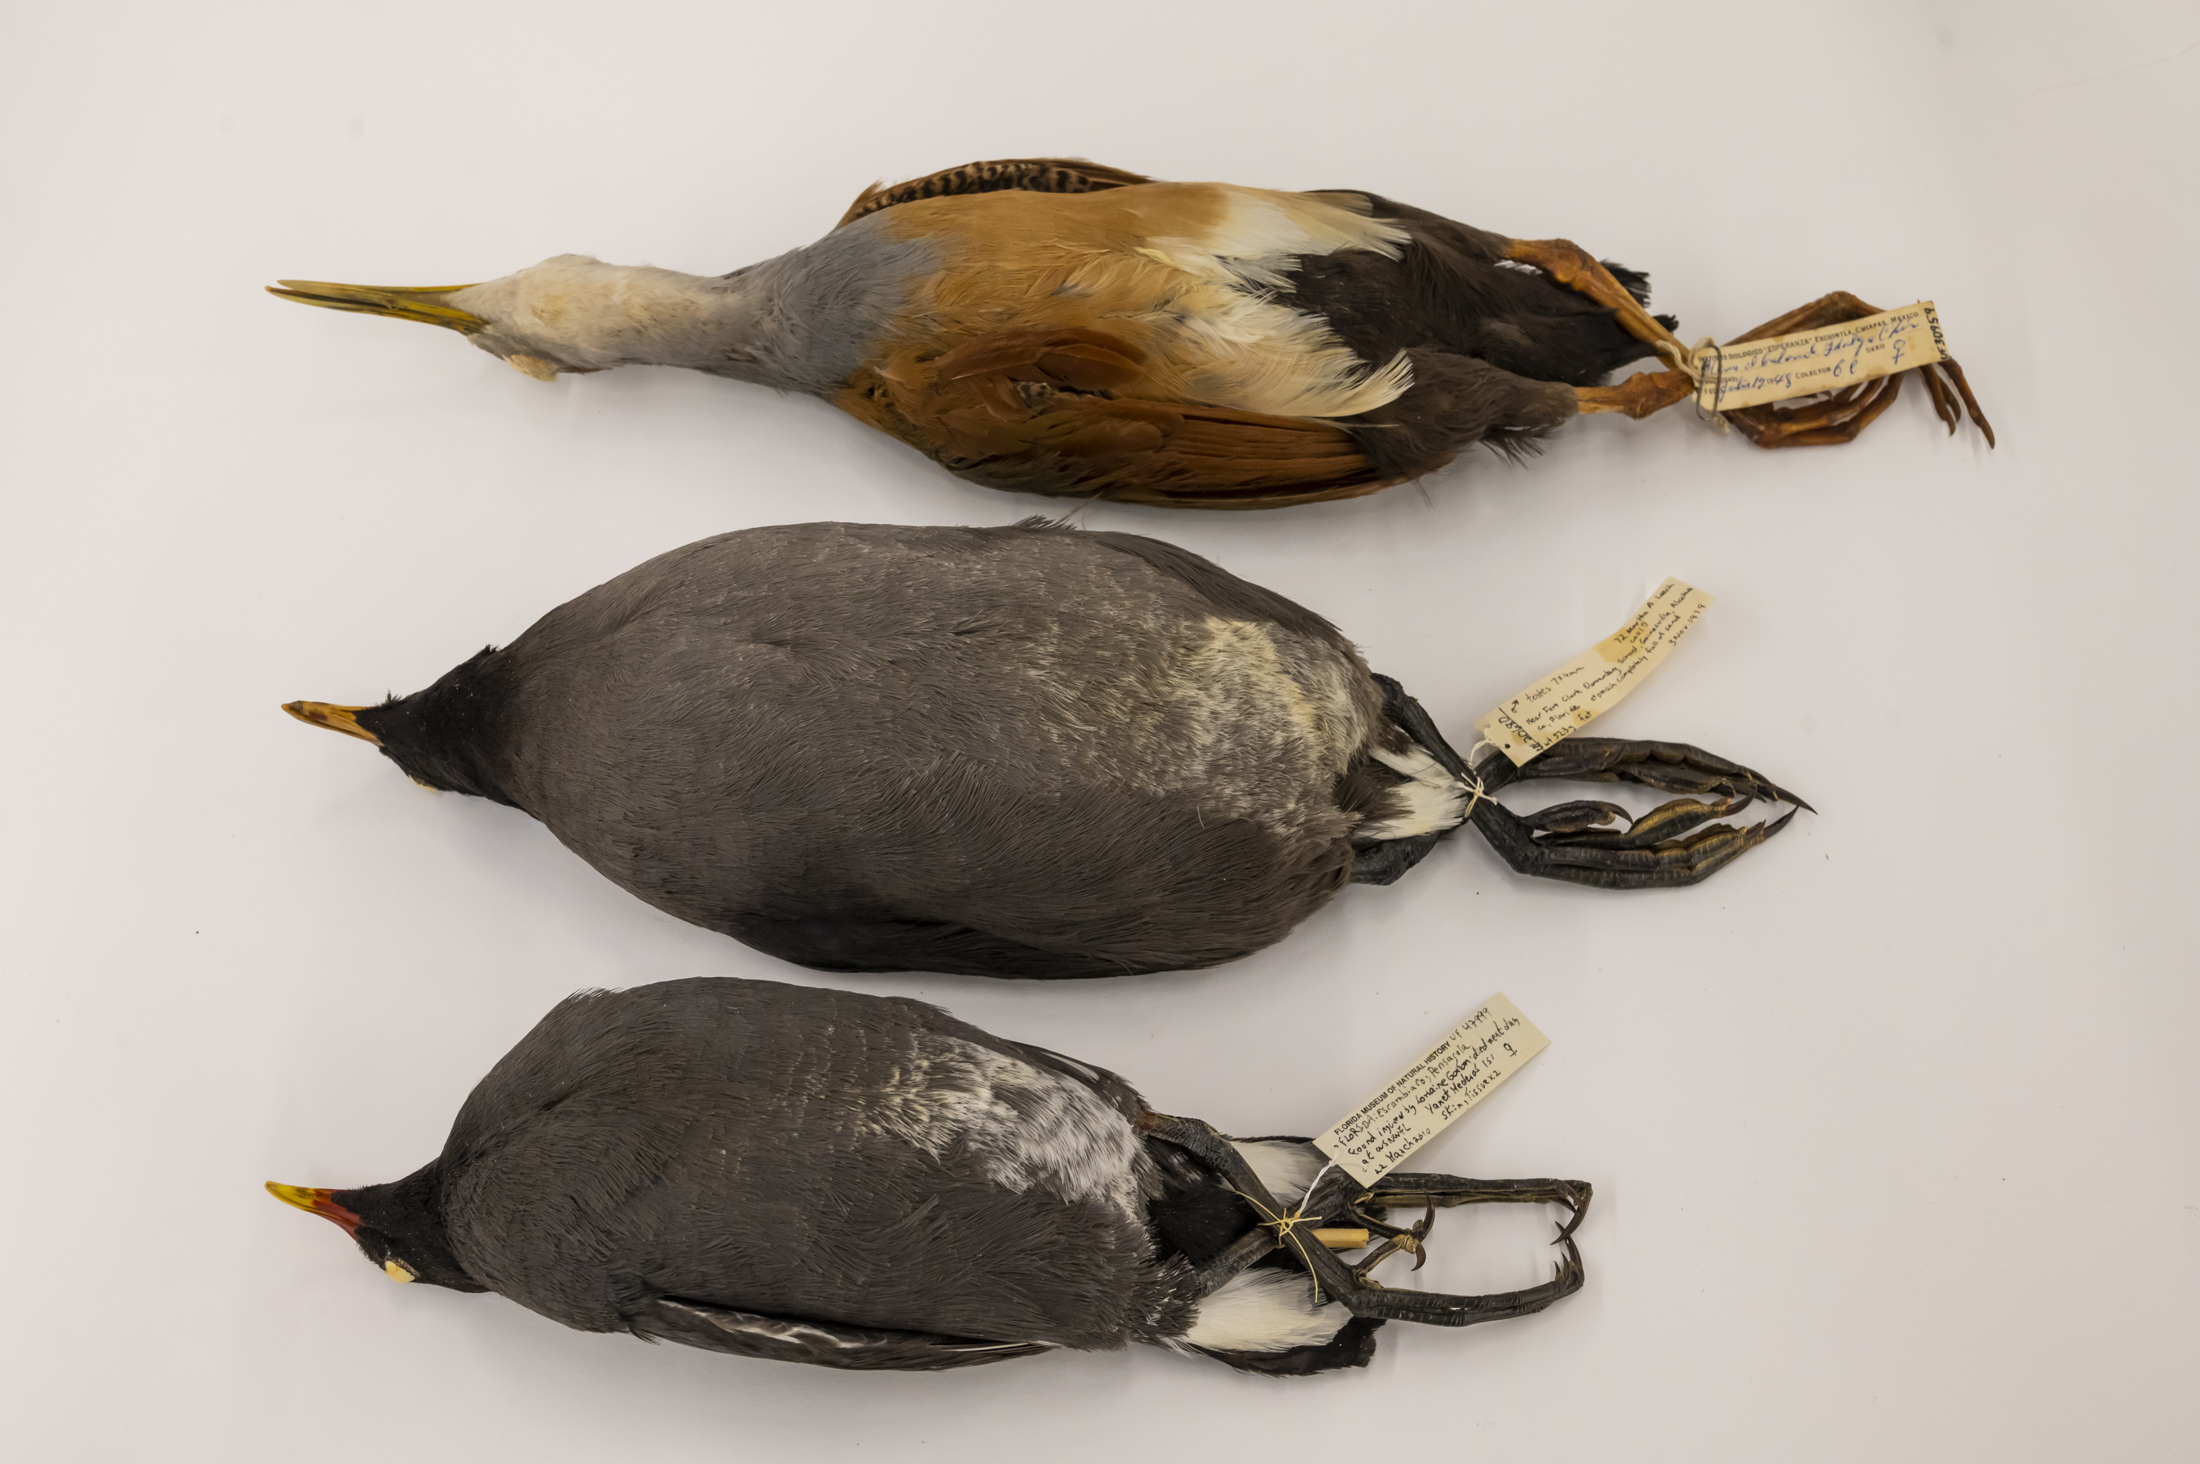 Three dead birds tagged with labels on their feet